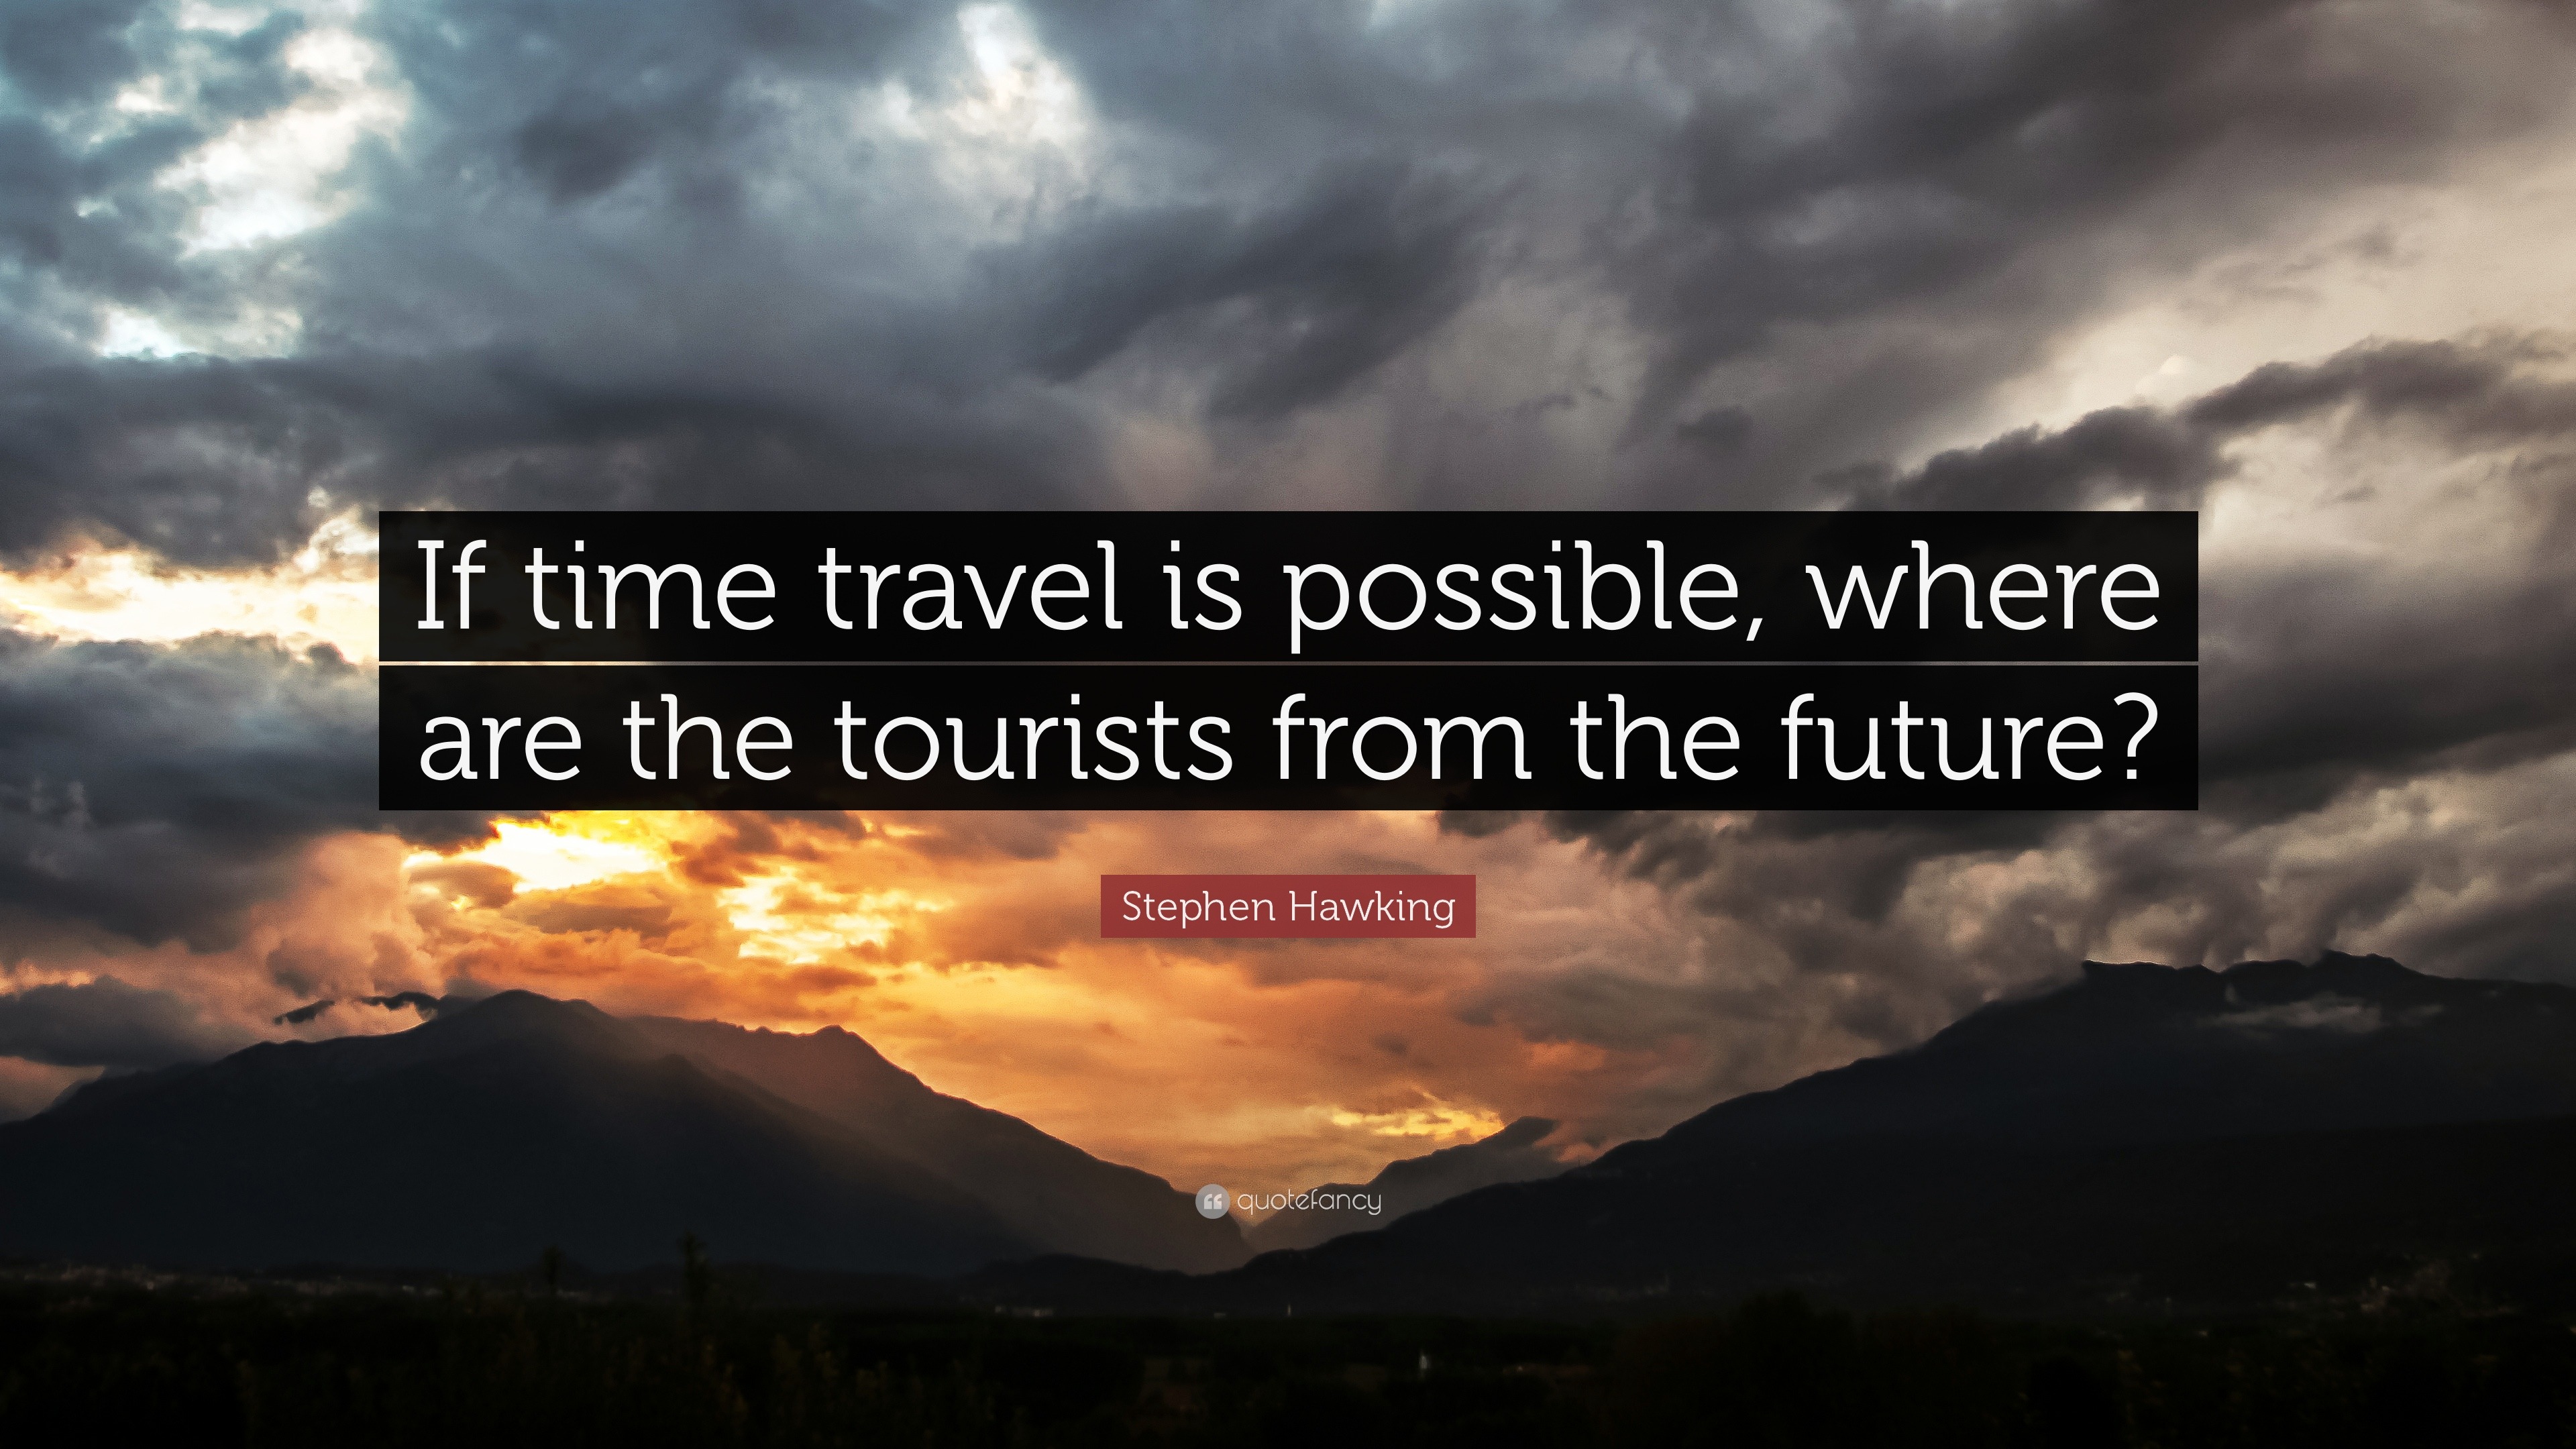 Stephen Hawking Quote “If time travel is possible, where are the